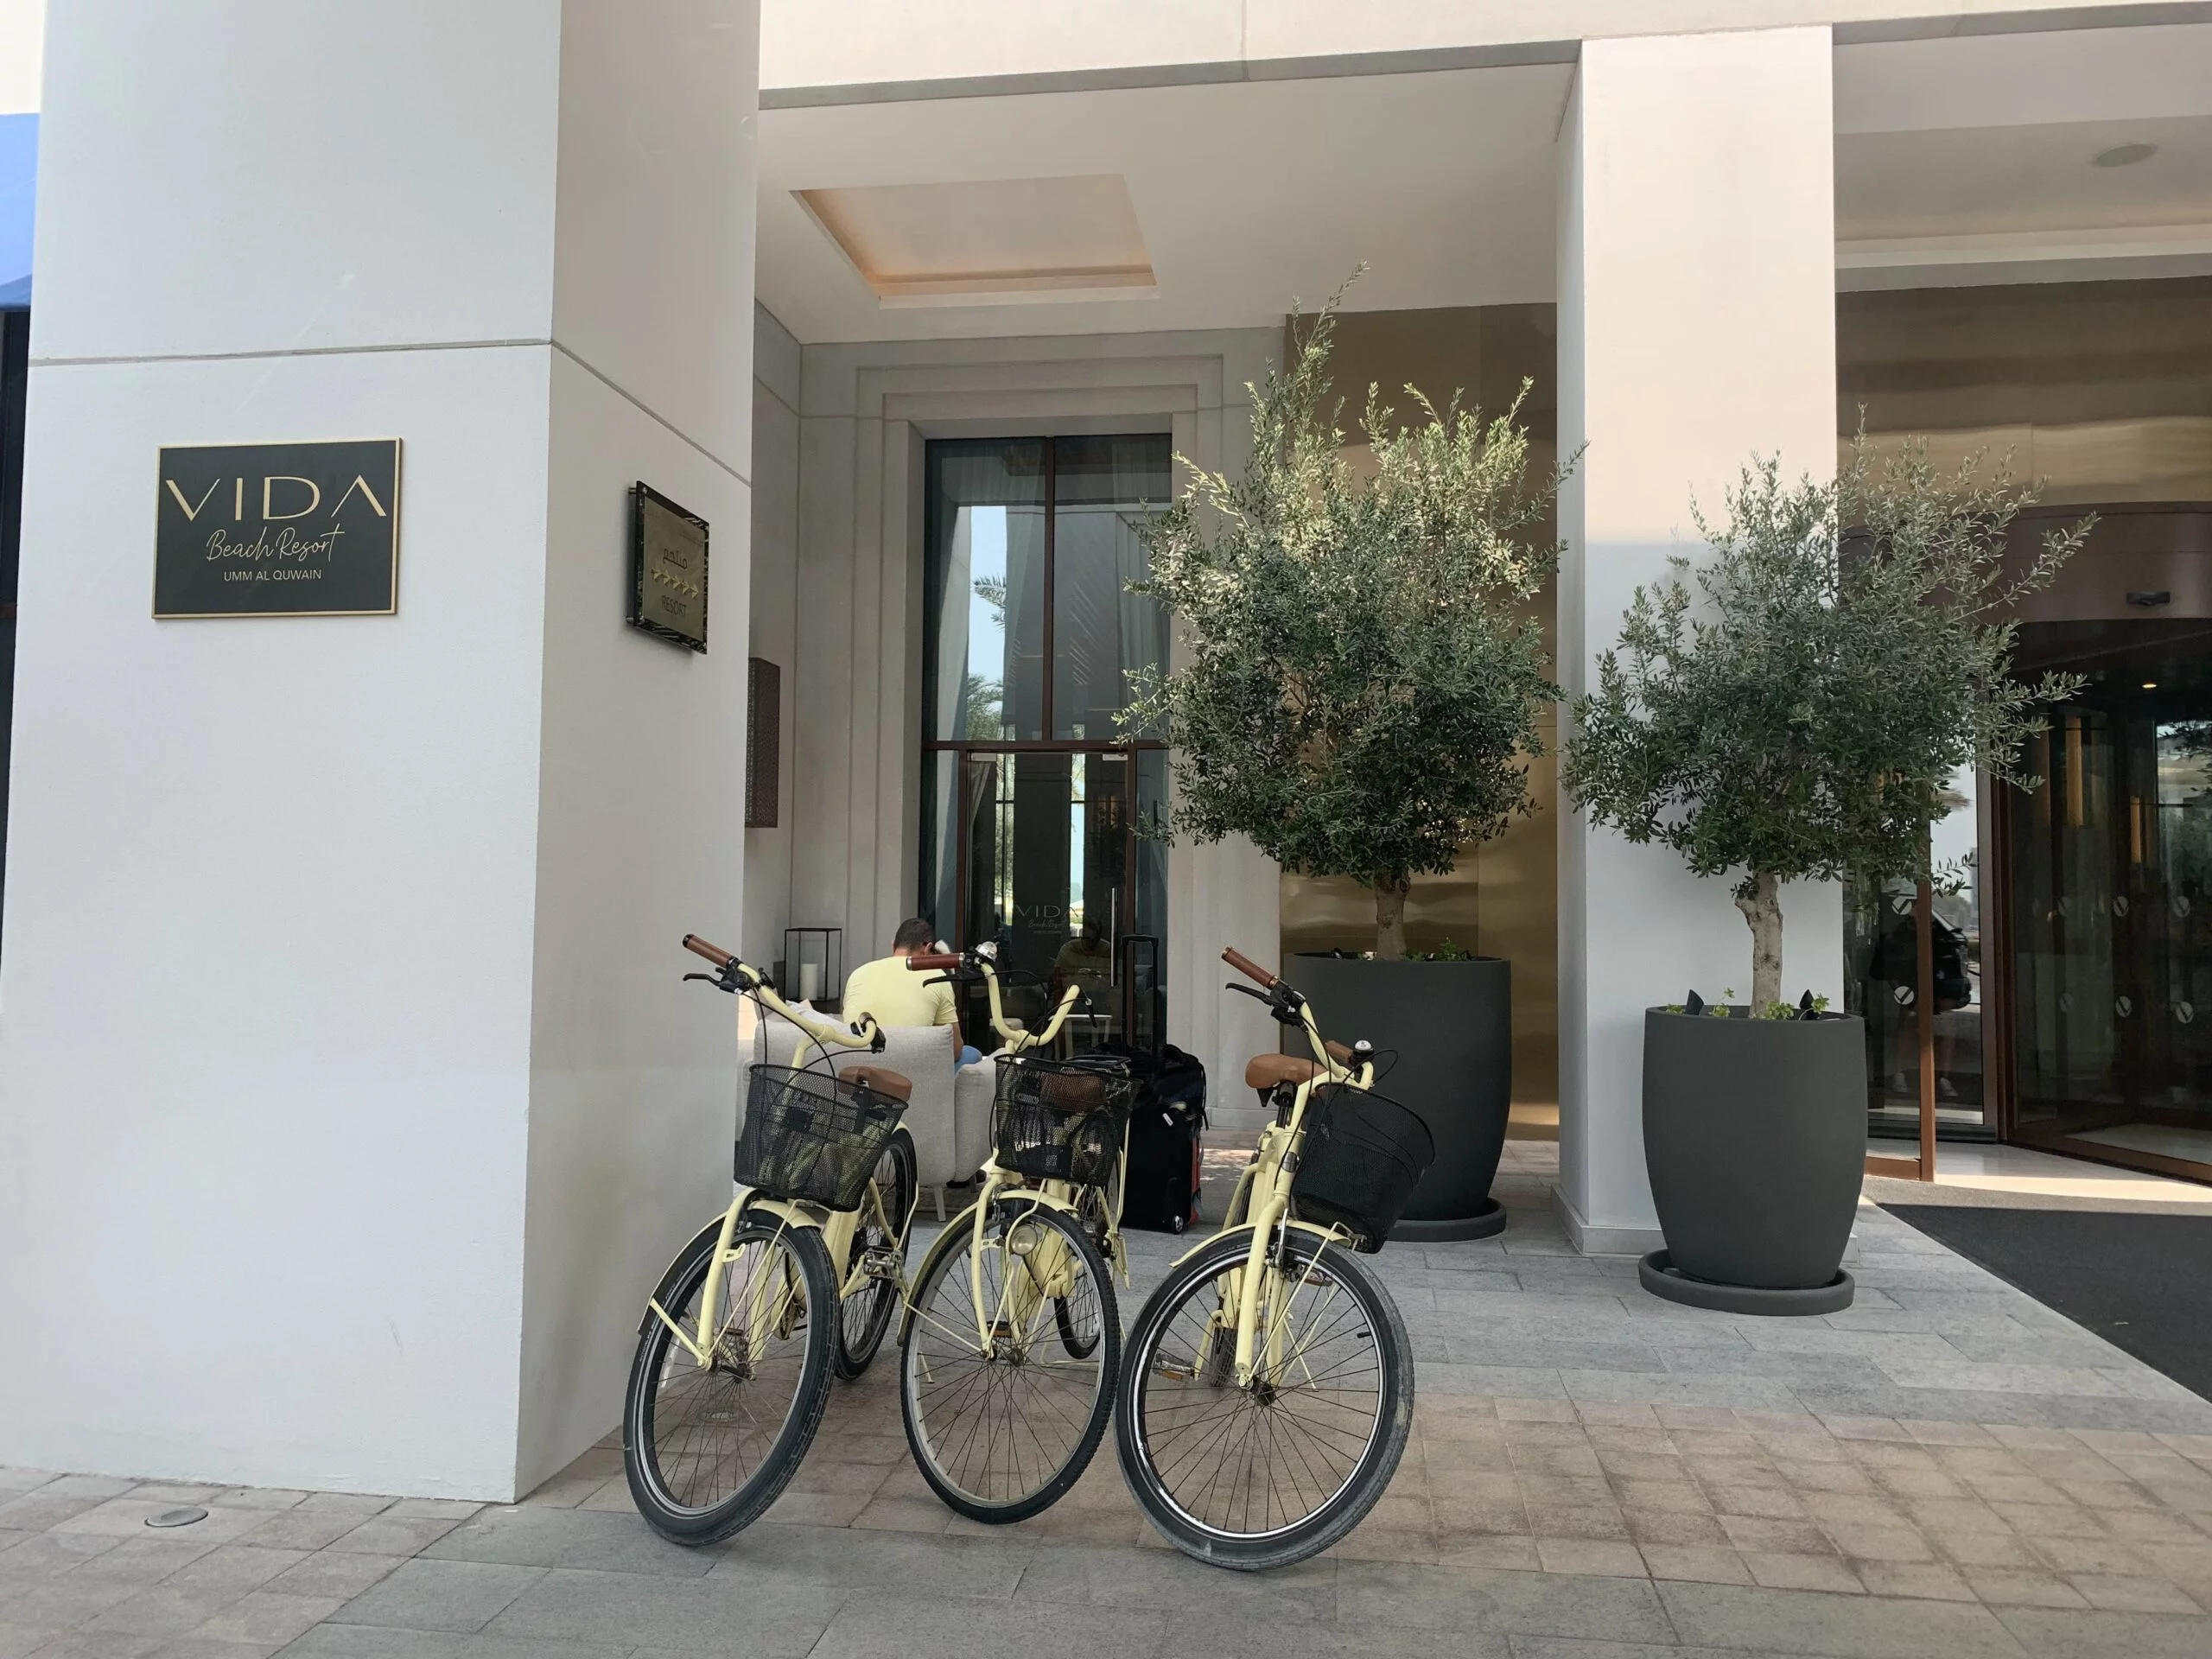 Olive Trees Are Everywhere. Bikes are free for hotel guests.